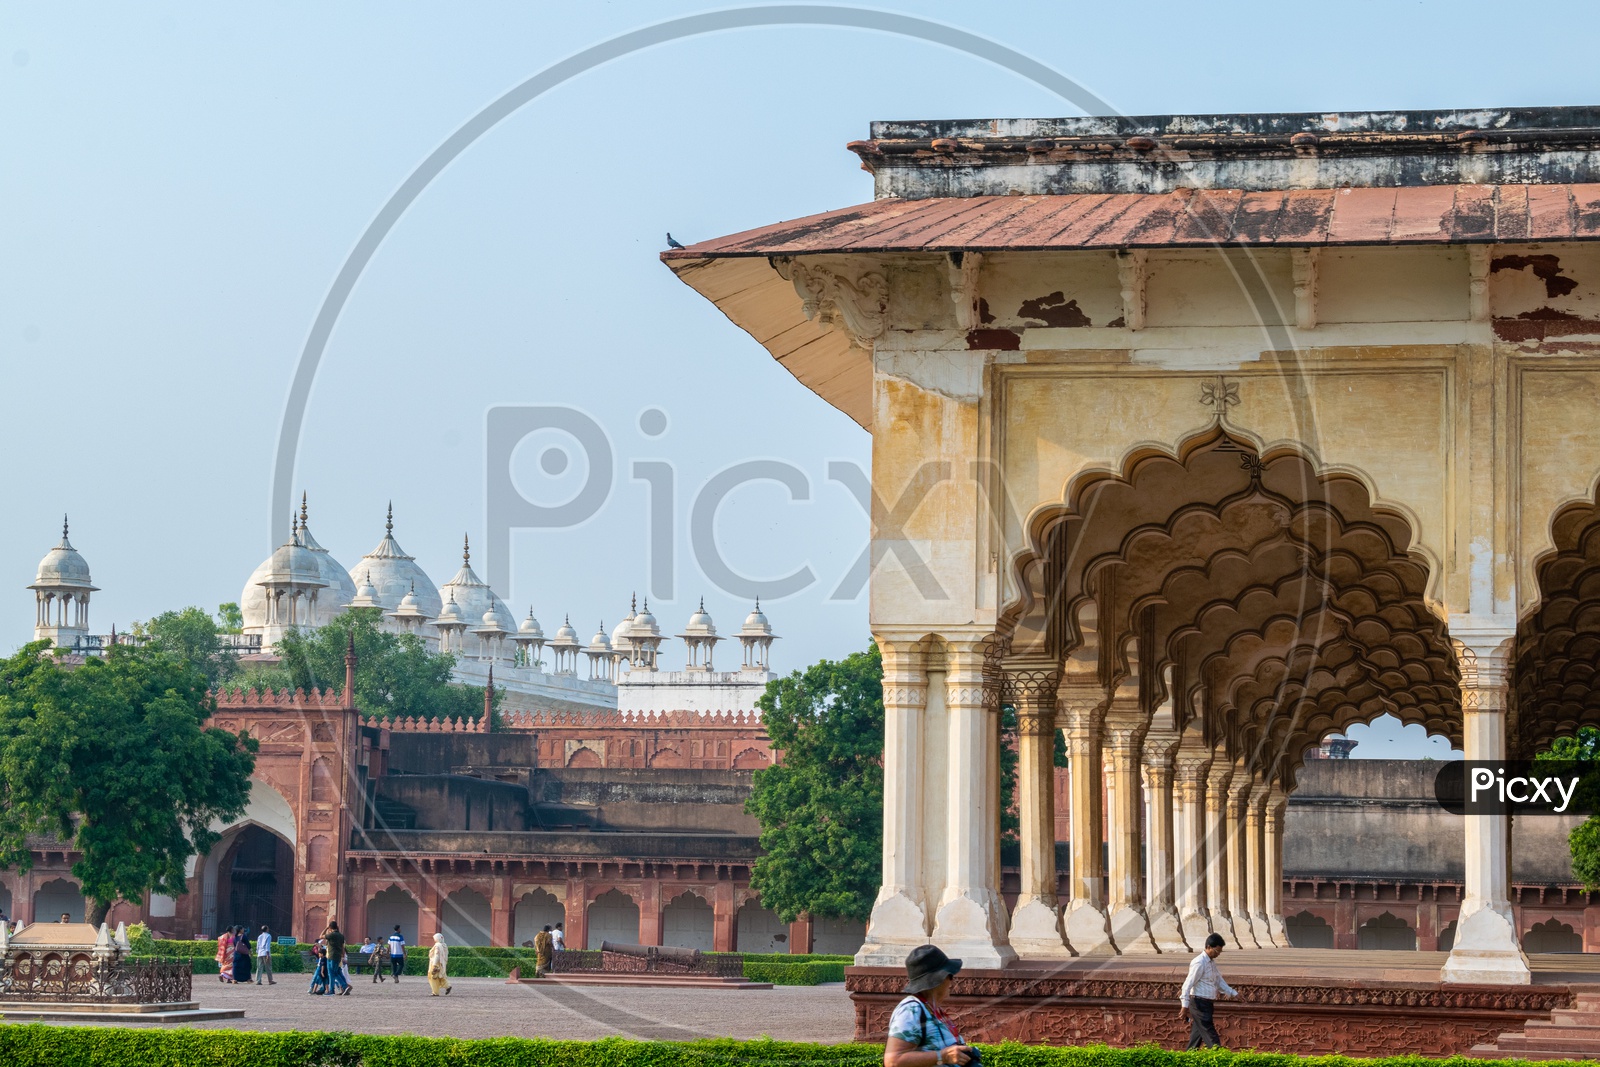 Architecture Of Agra Fort With Interior Walls And pillars